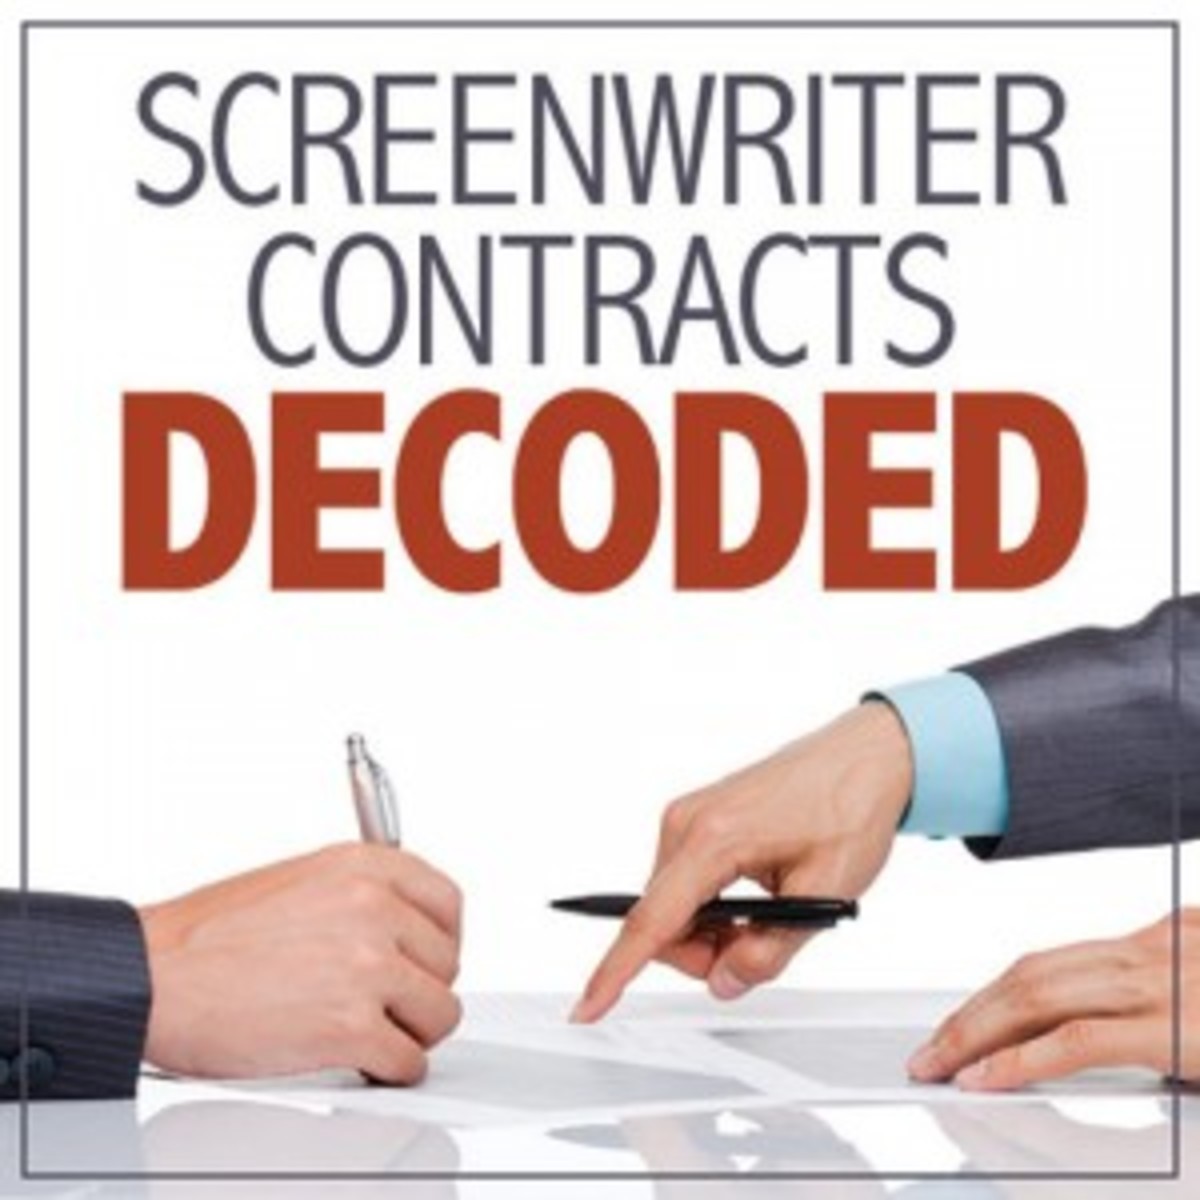 Screenwriter Contracts Decoded